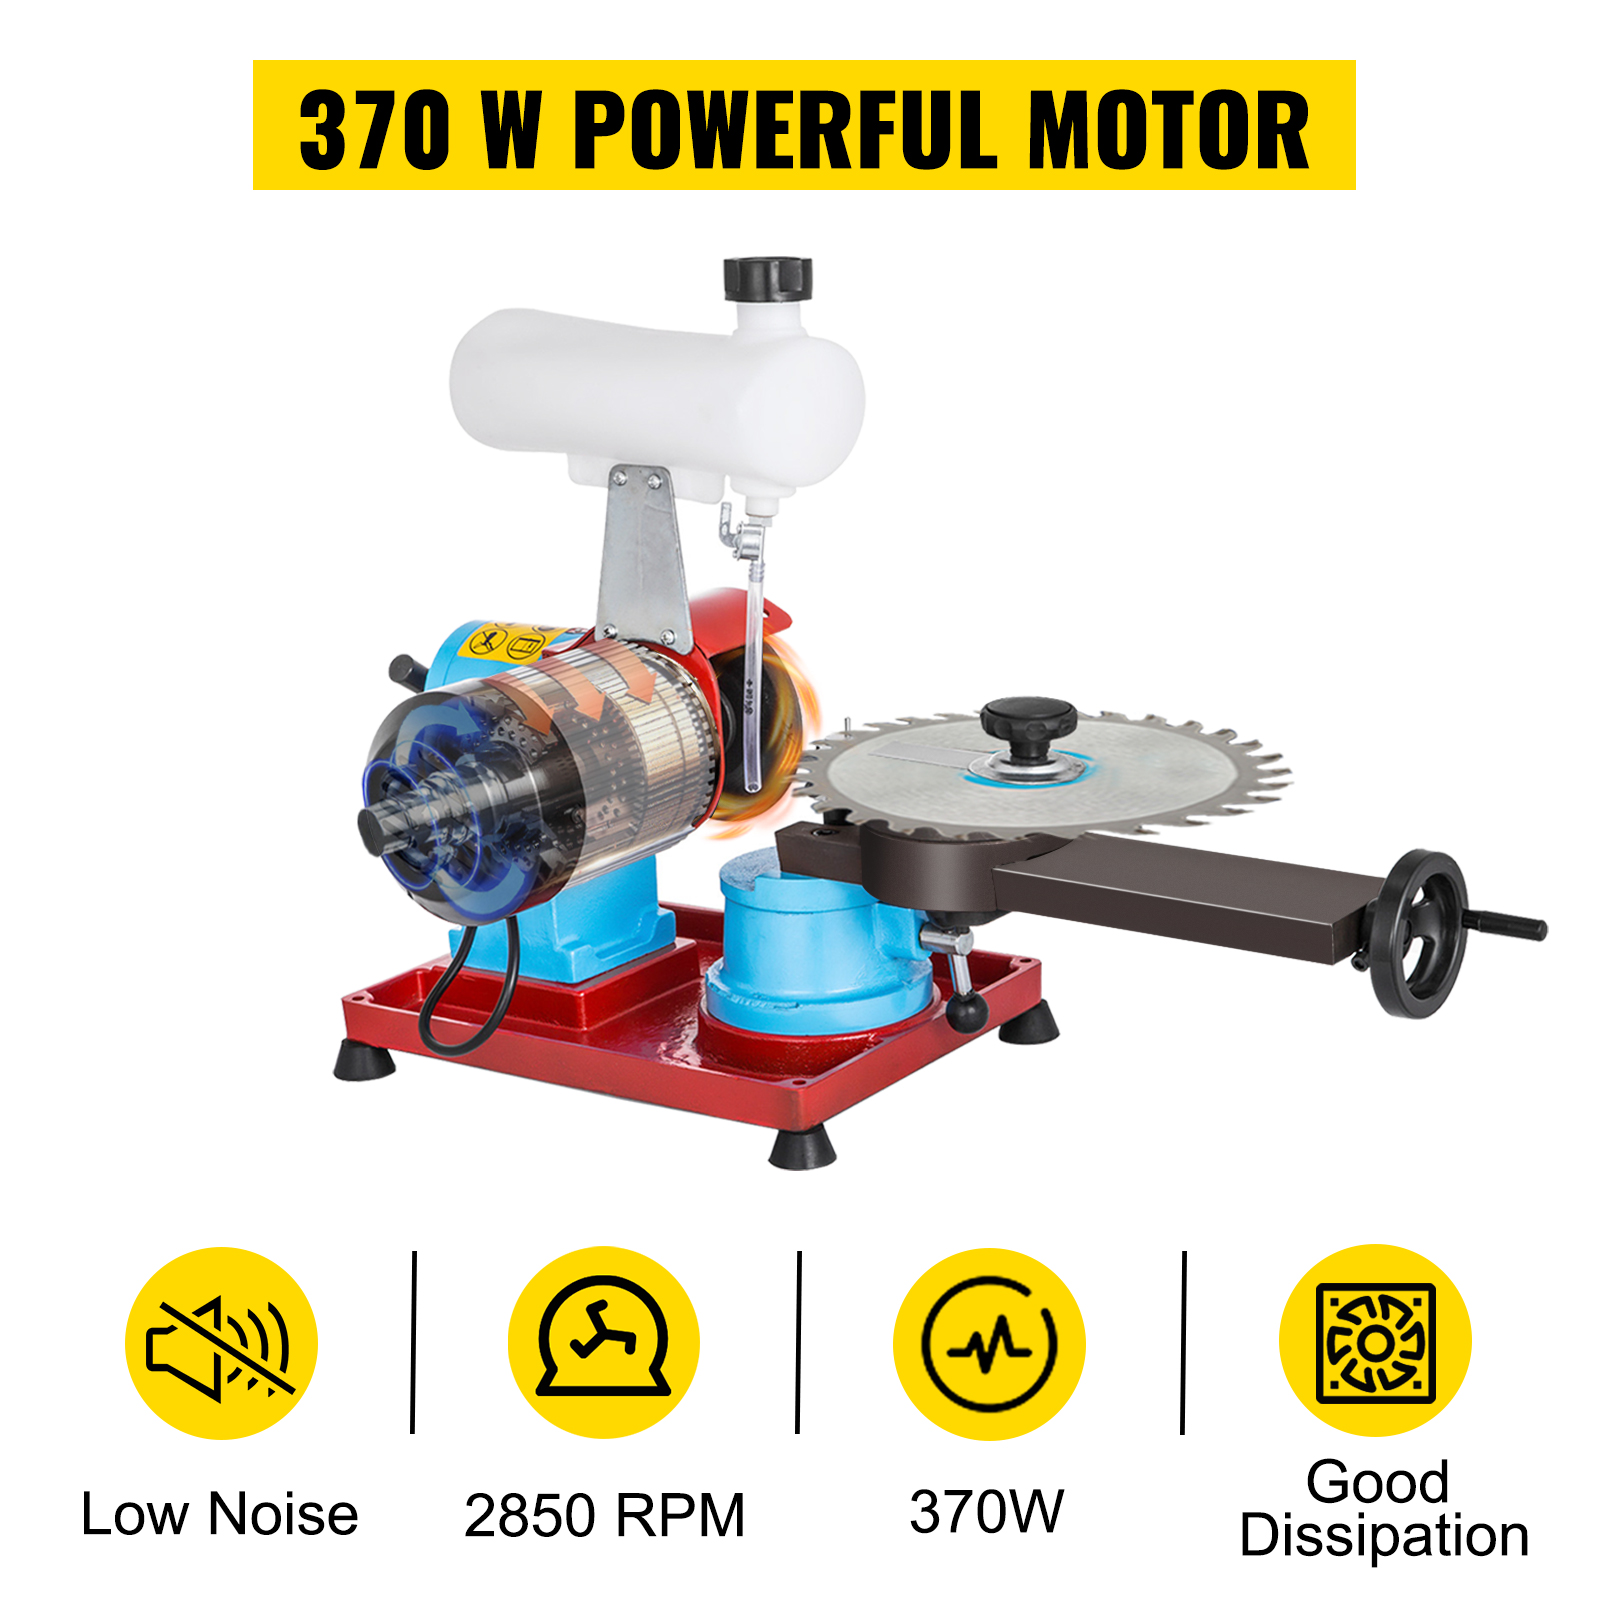 110V, Water Injection, 2850rpm